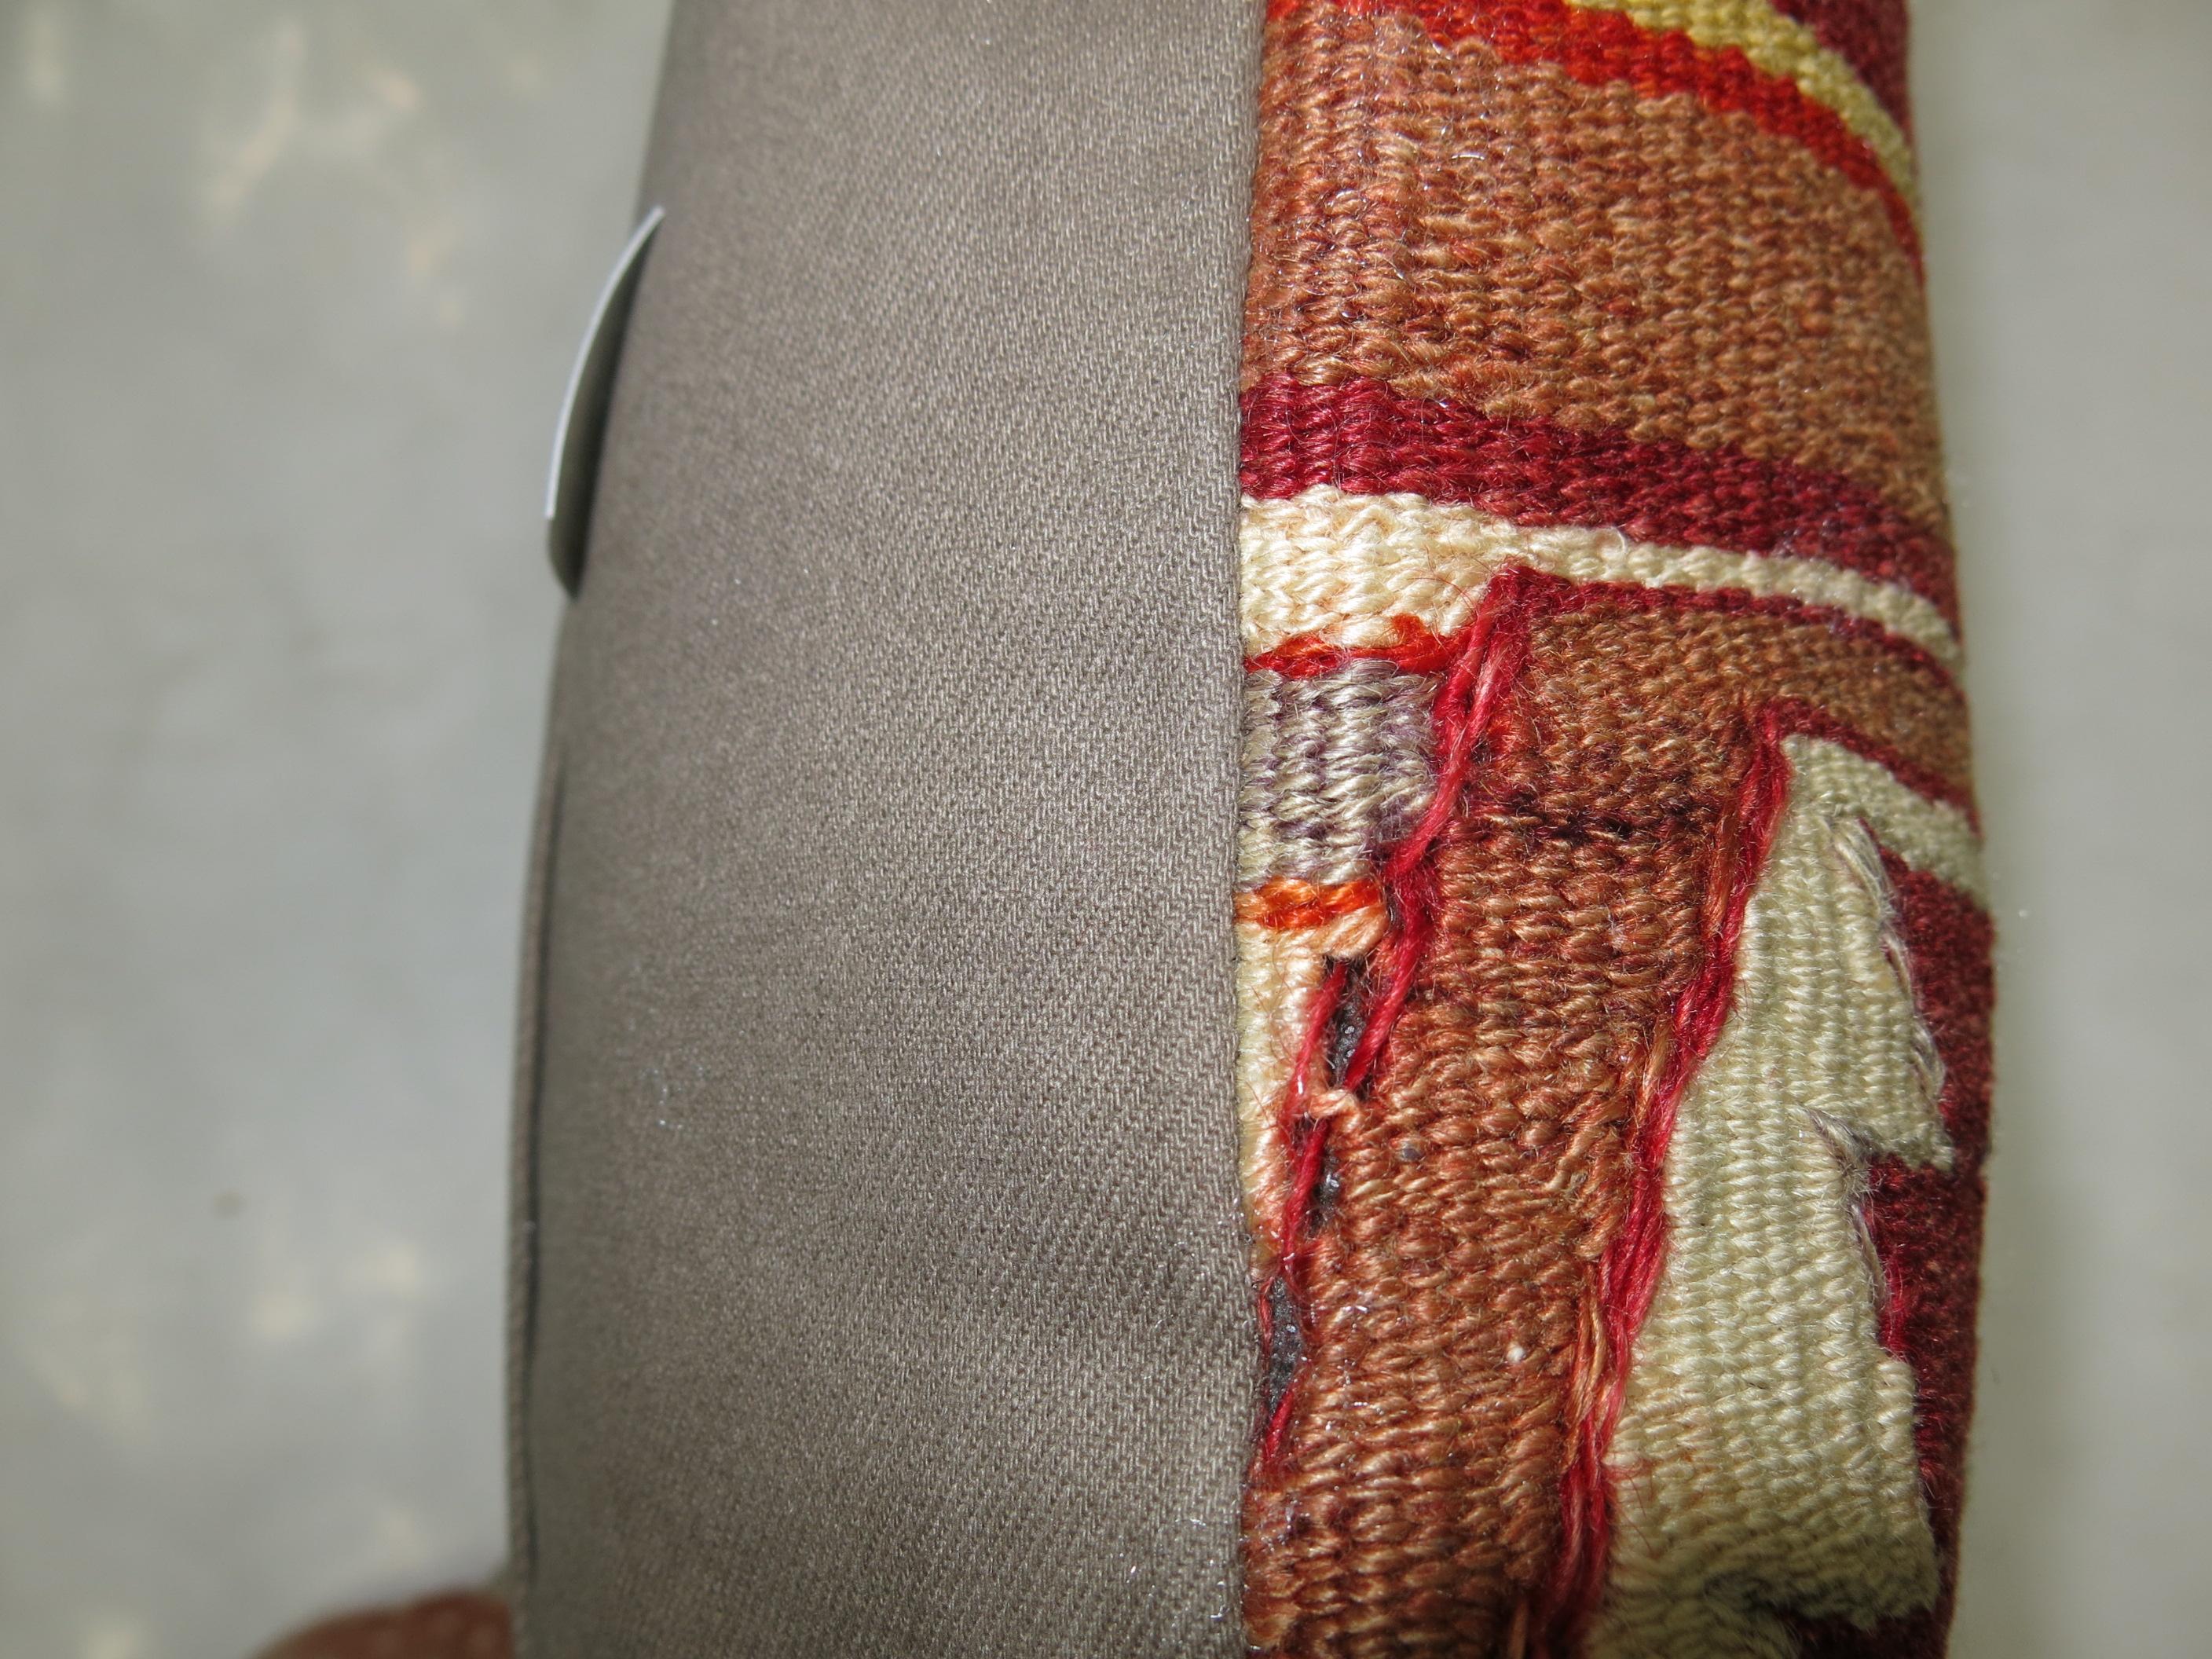 Small Pillow made from a vintage Turkish Kilim flat-weave.